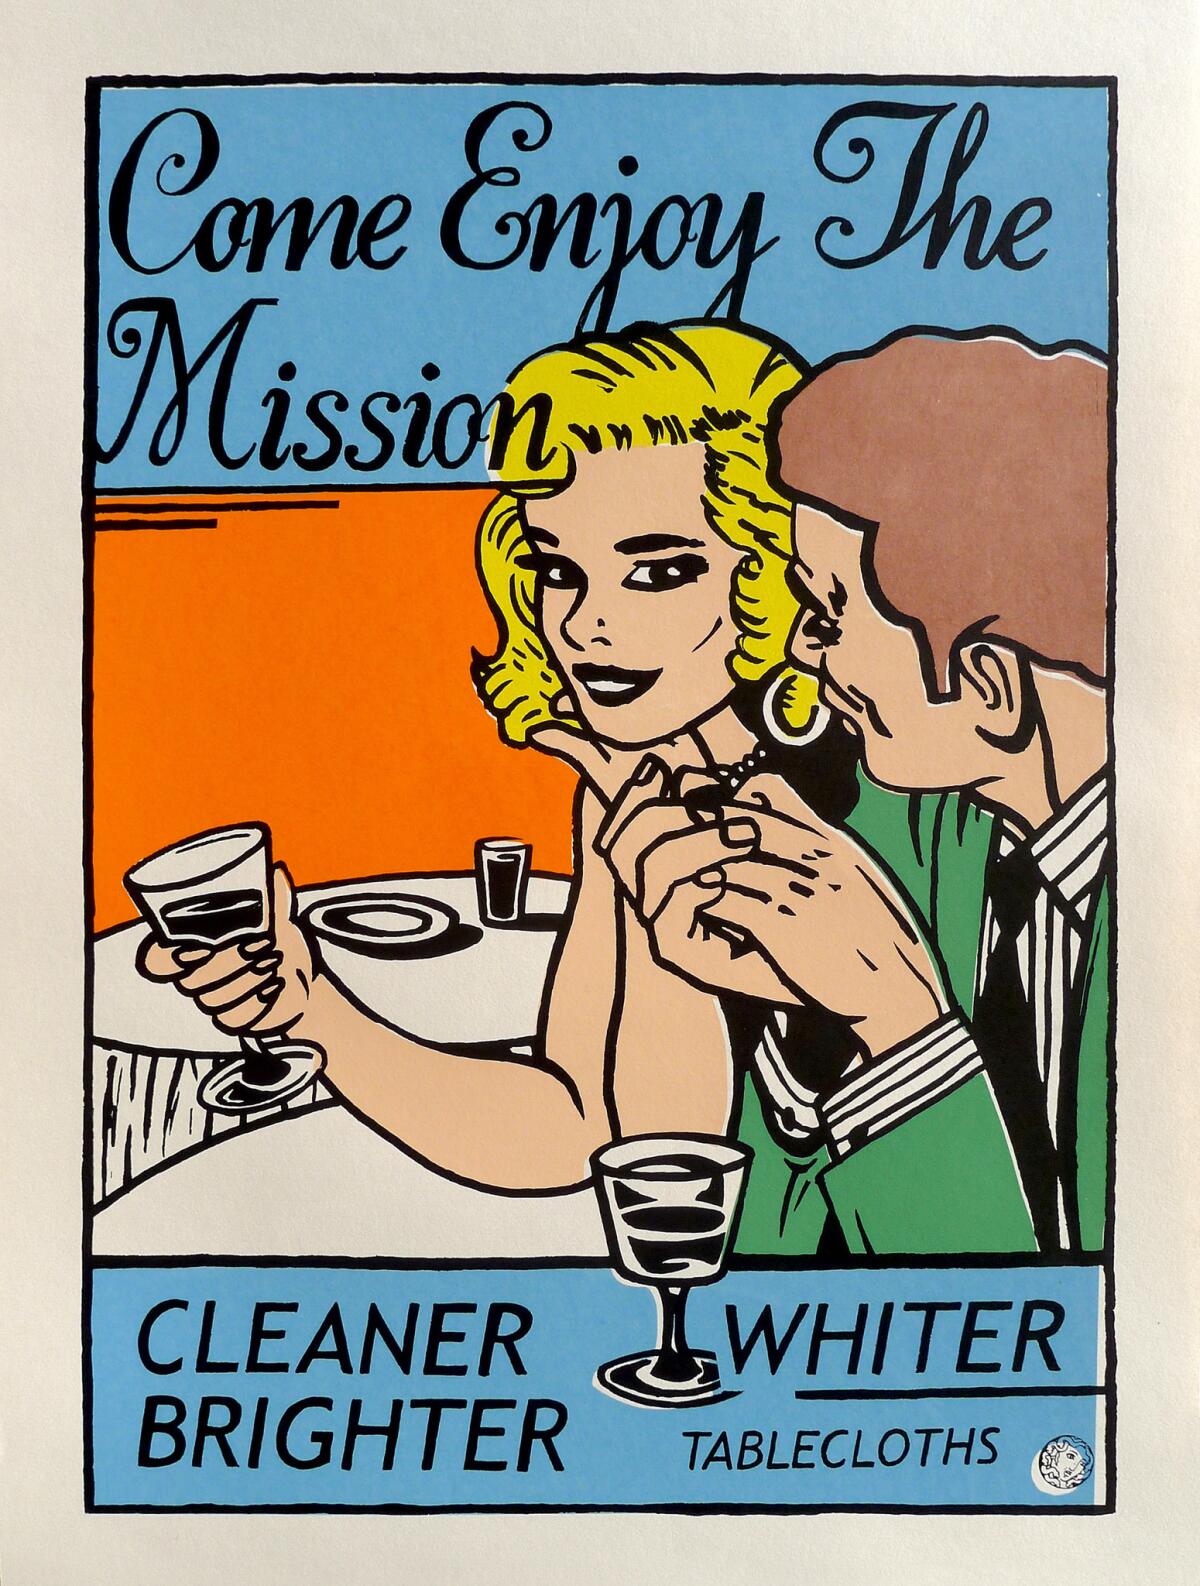 "Come Enjoy the Mission," San Francisco Print Collective, silk screen, 2000, San Francisco. (Center for the Study of Political Graphics)